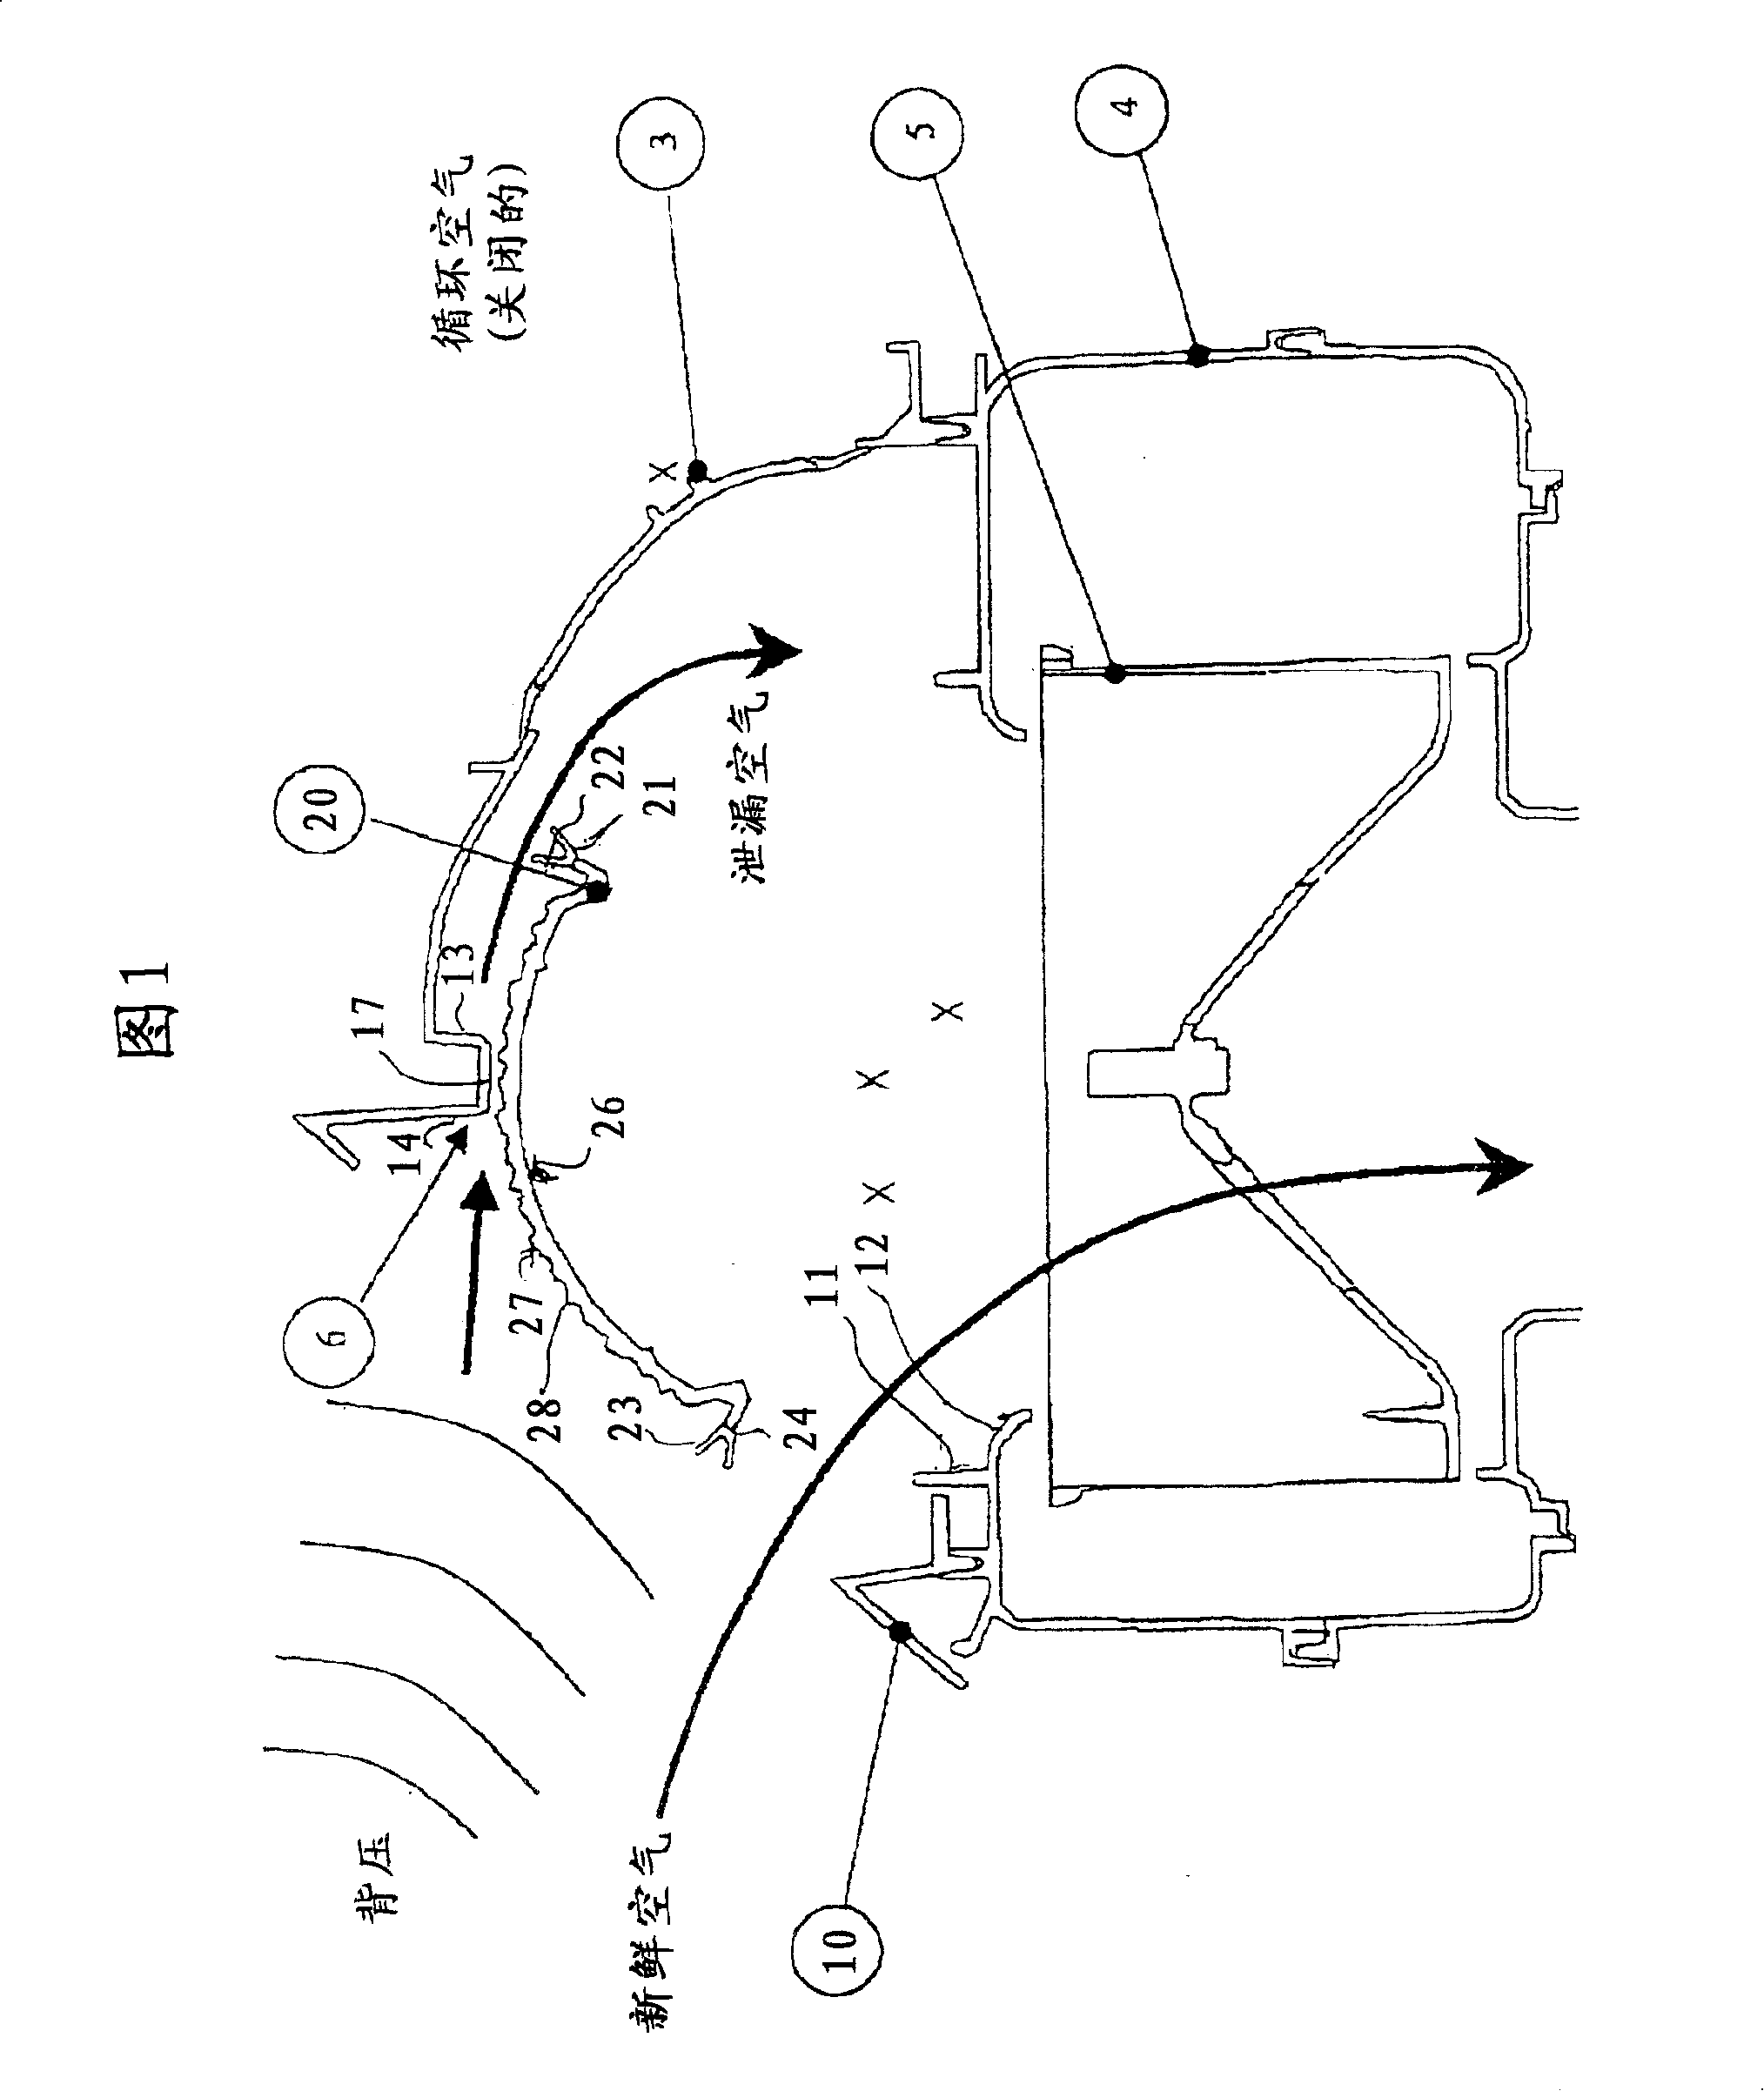 Cylindrical flap with structured rough surfaces